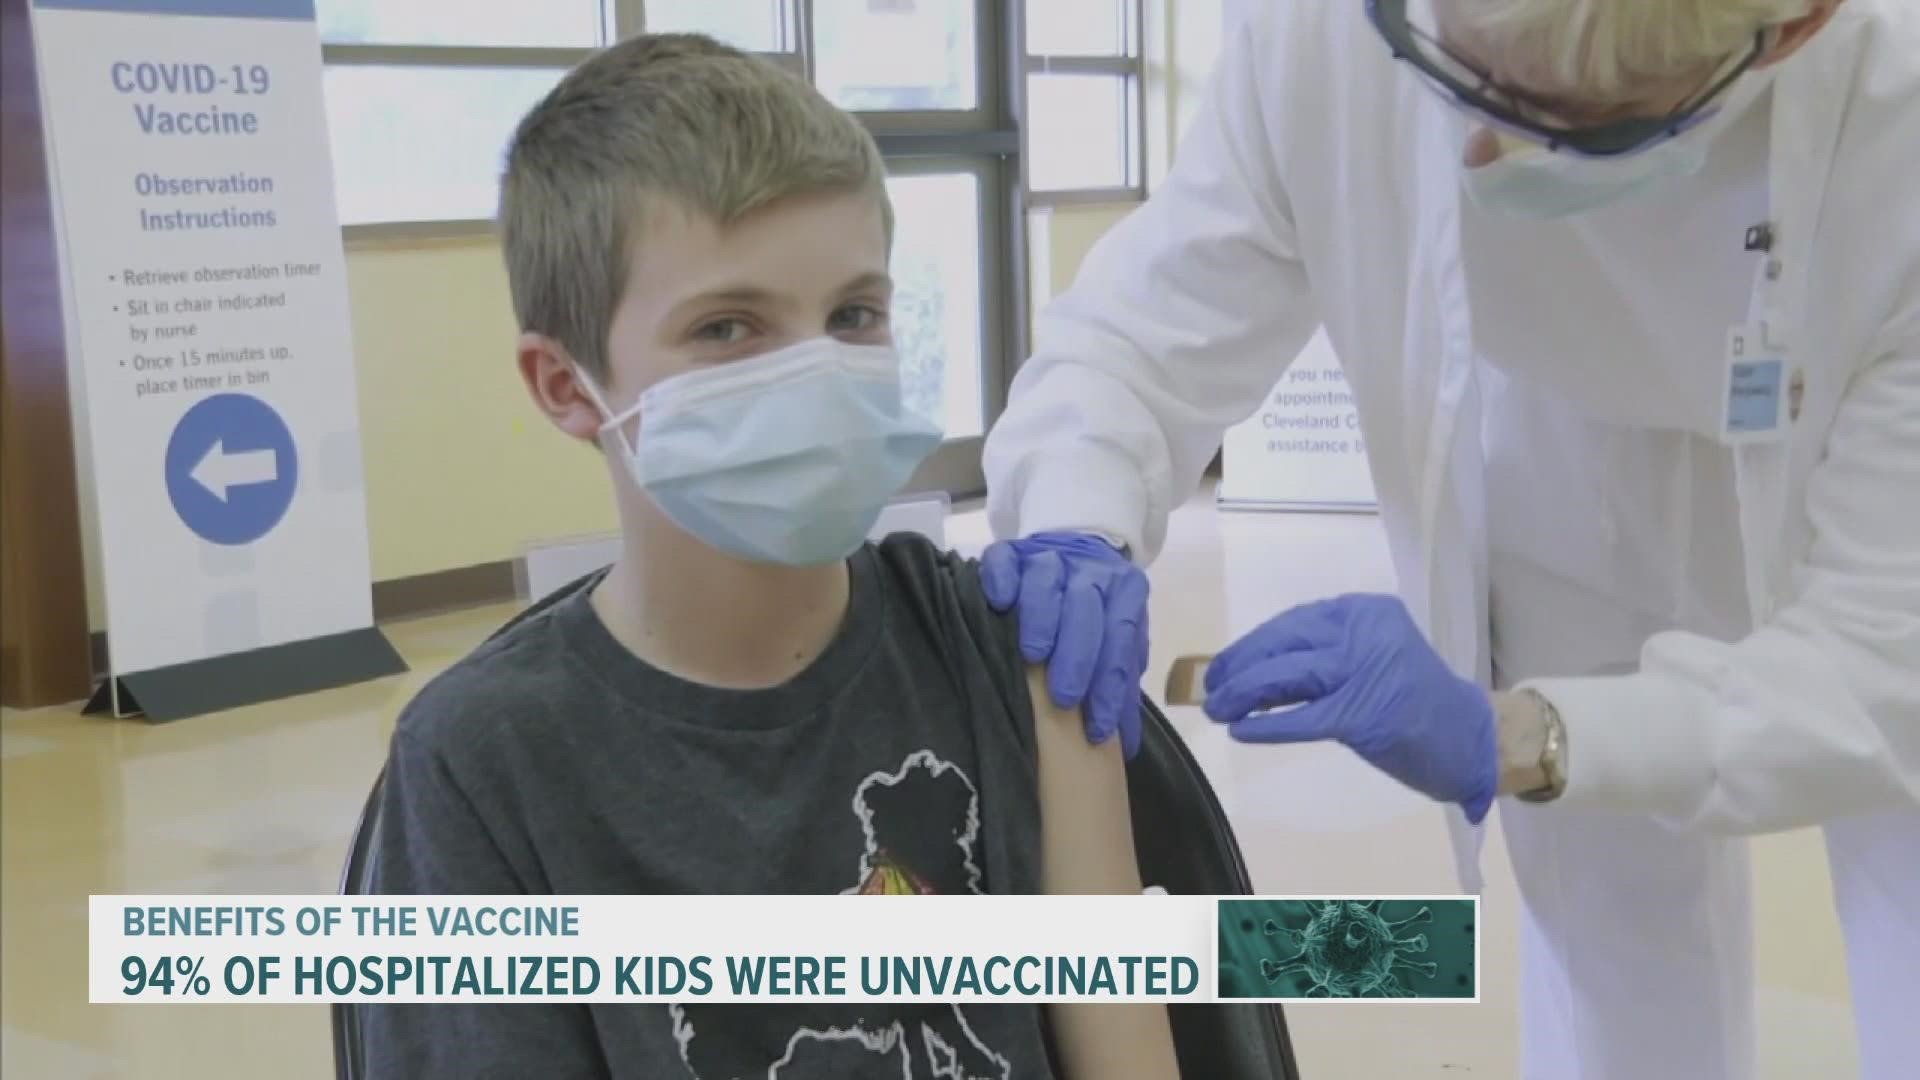 At Blank Children's Hospital, 94% of kids hospitalized with COVID were unvaccinated, according to Dr. Joel Waddell.